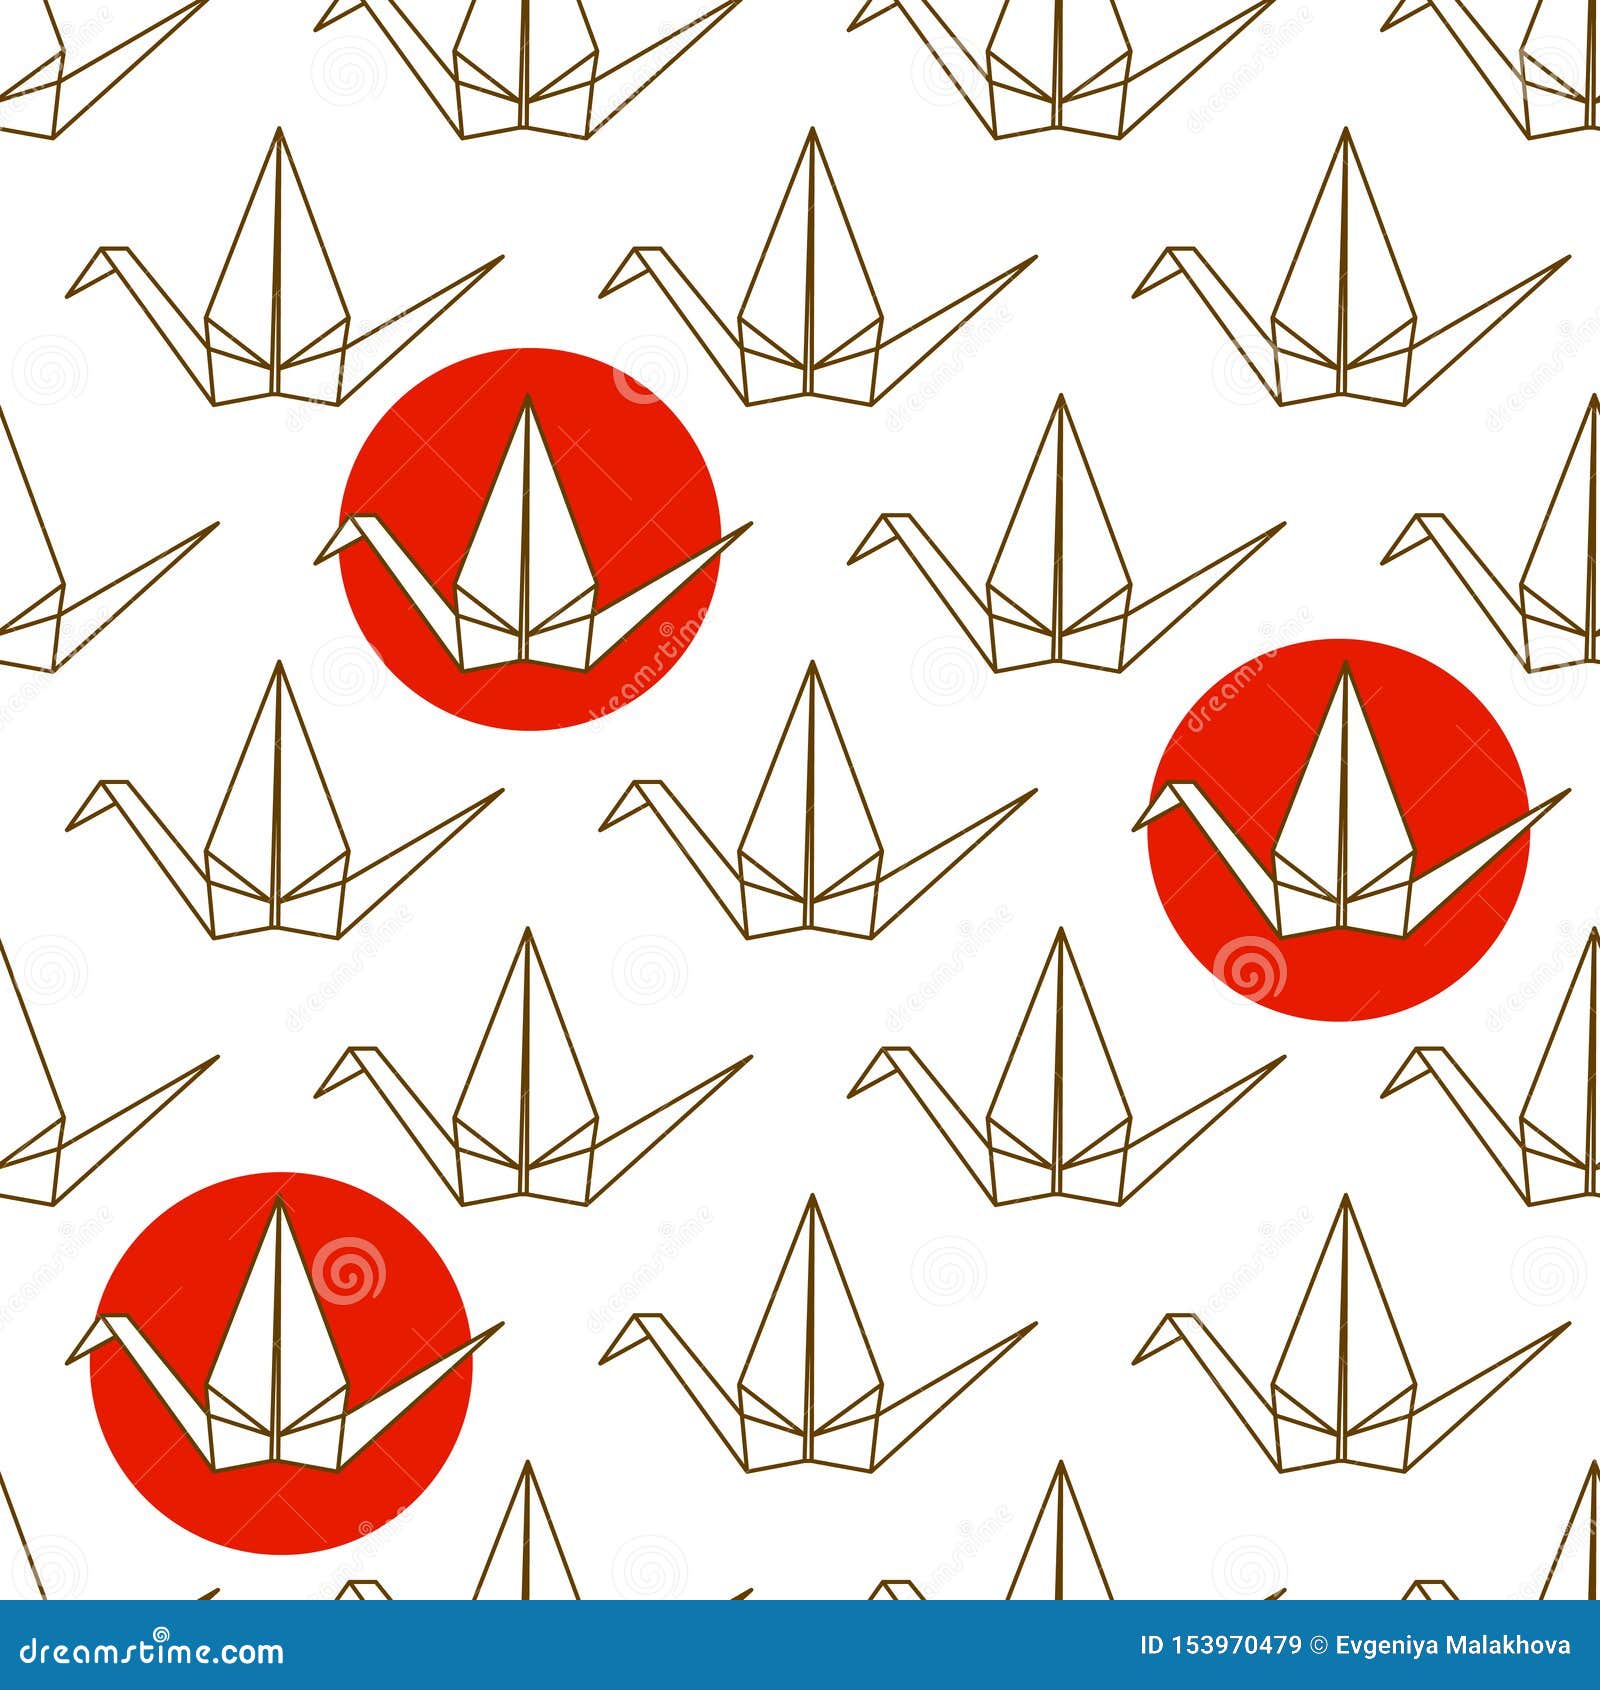 seamless pattern with japanese origami cranes and red circles on white background